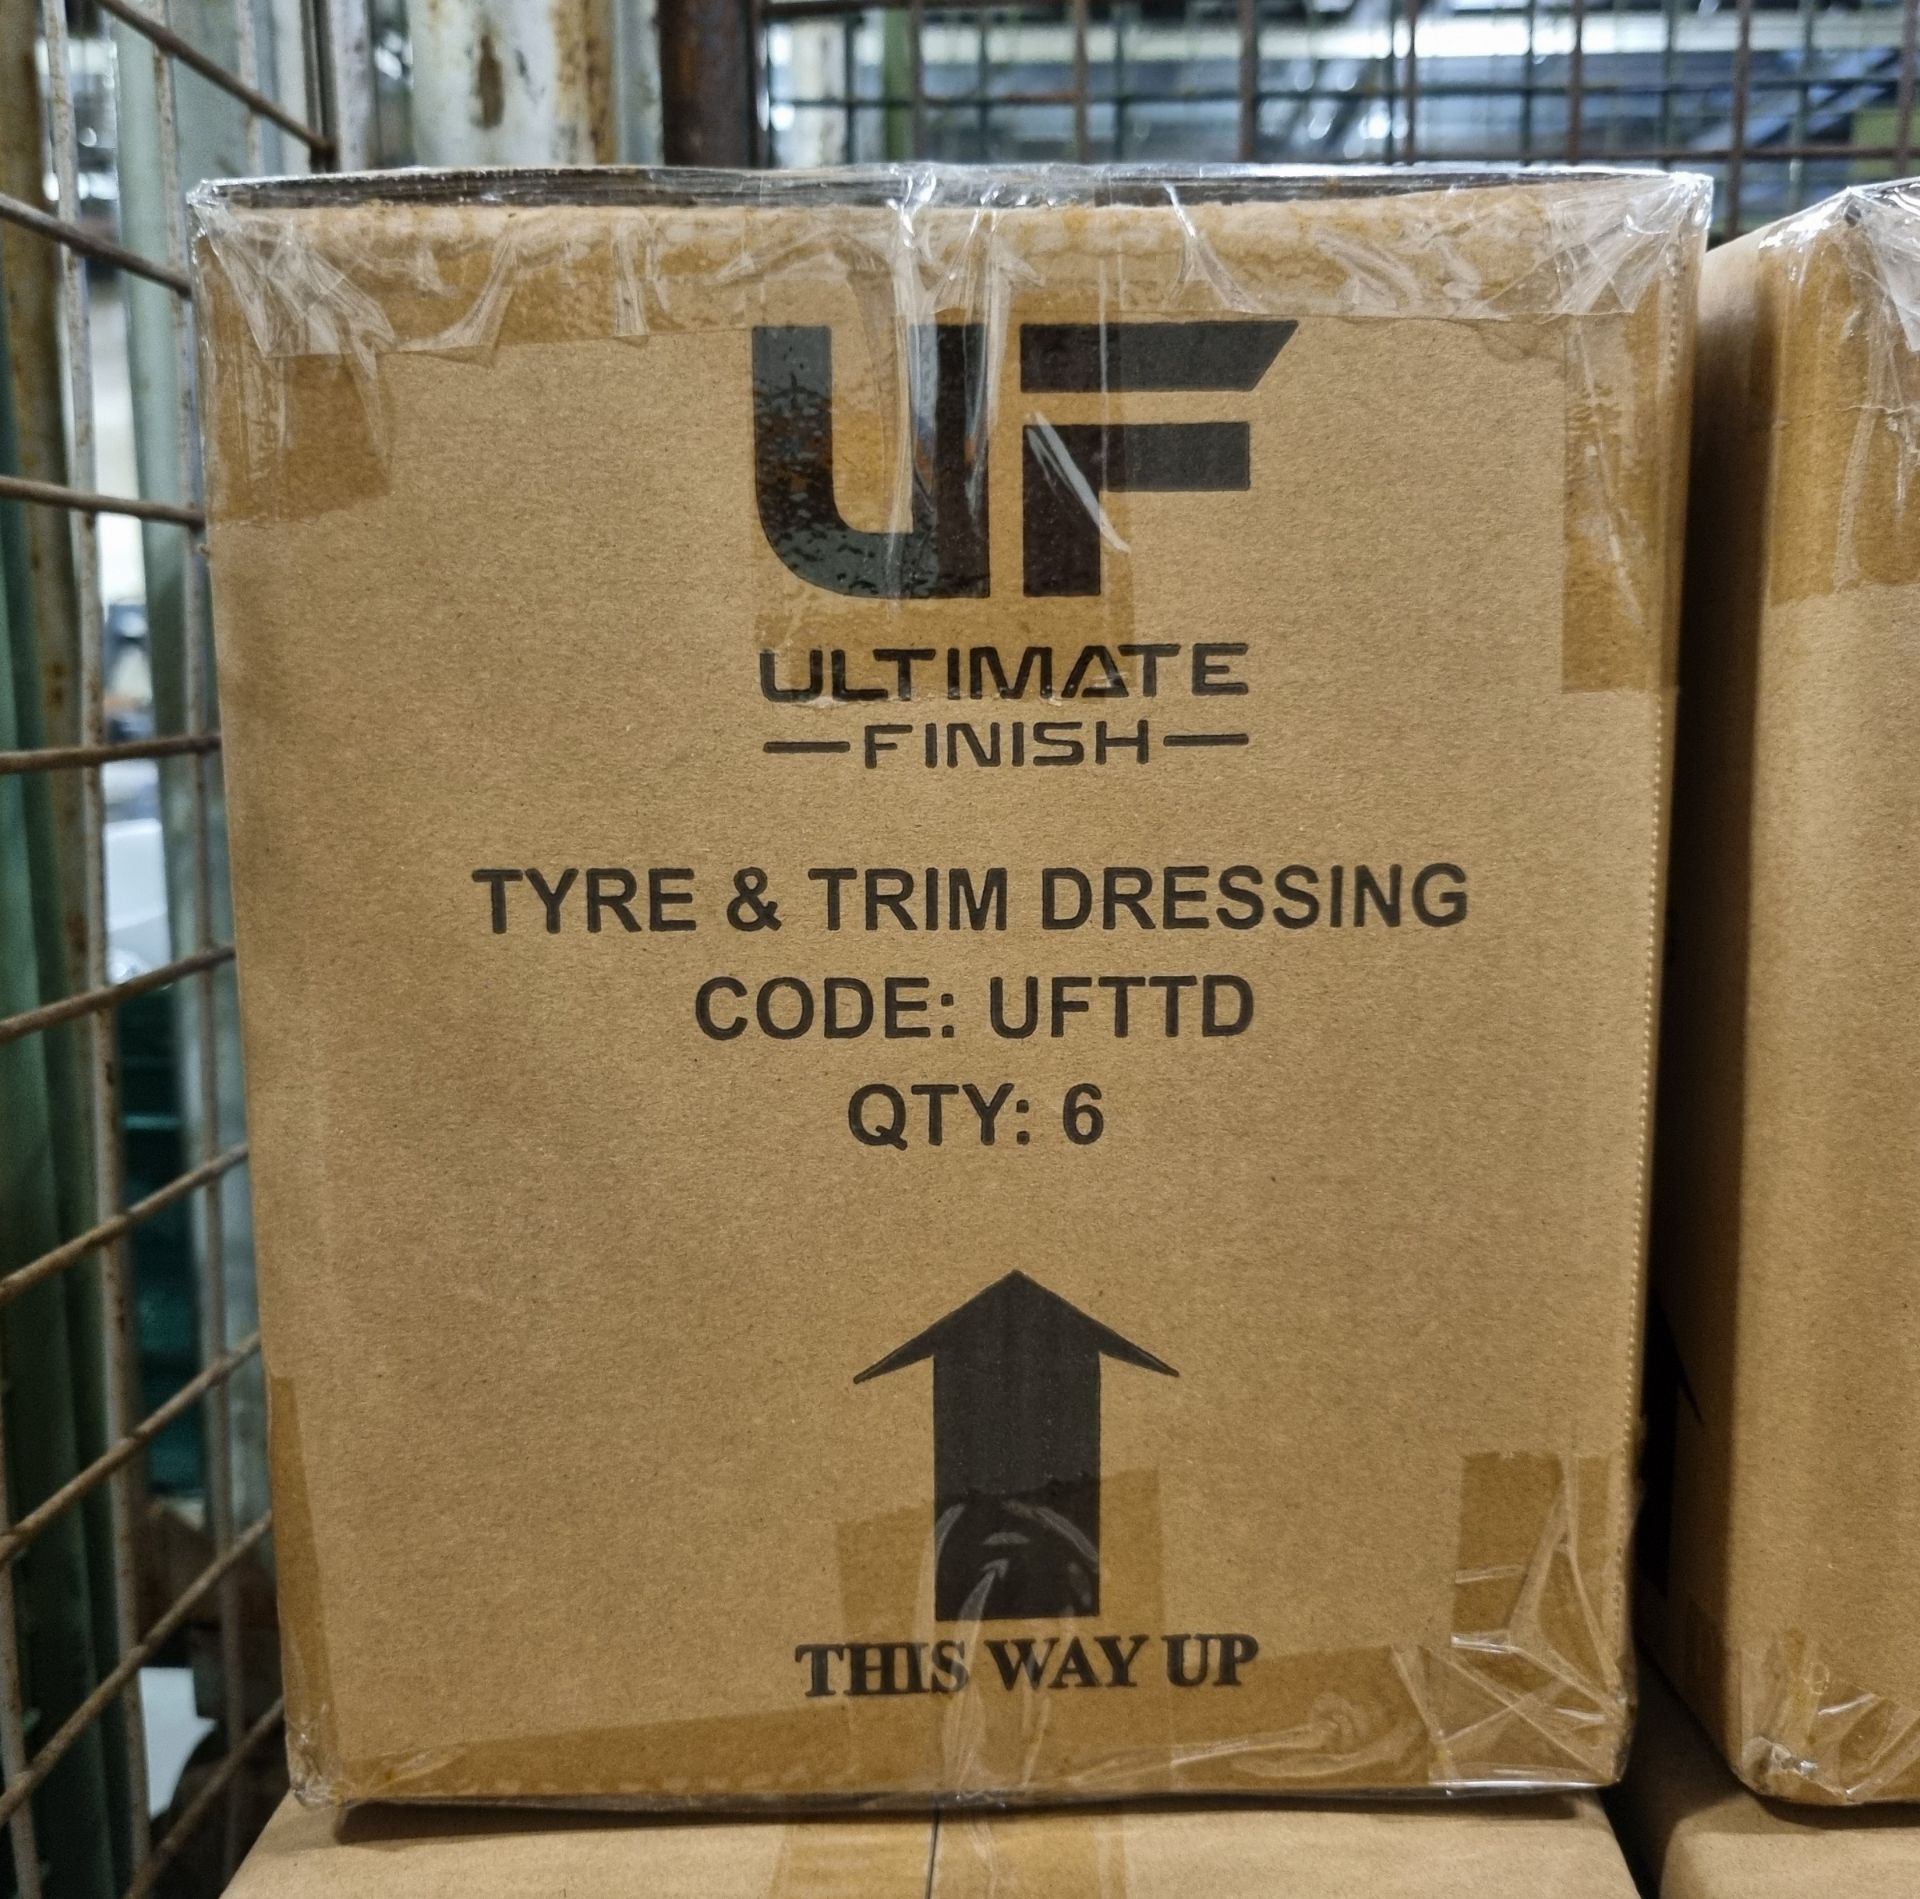 51x Ultimate Finish tyre & trim dressing kits (473ml bottle and applicator per pack) - Image 6 of 6